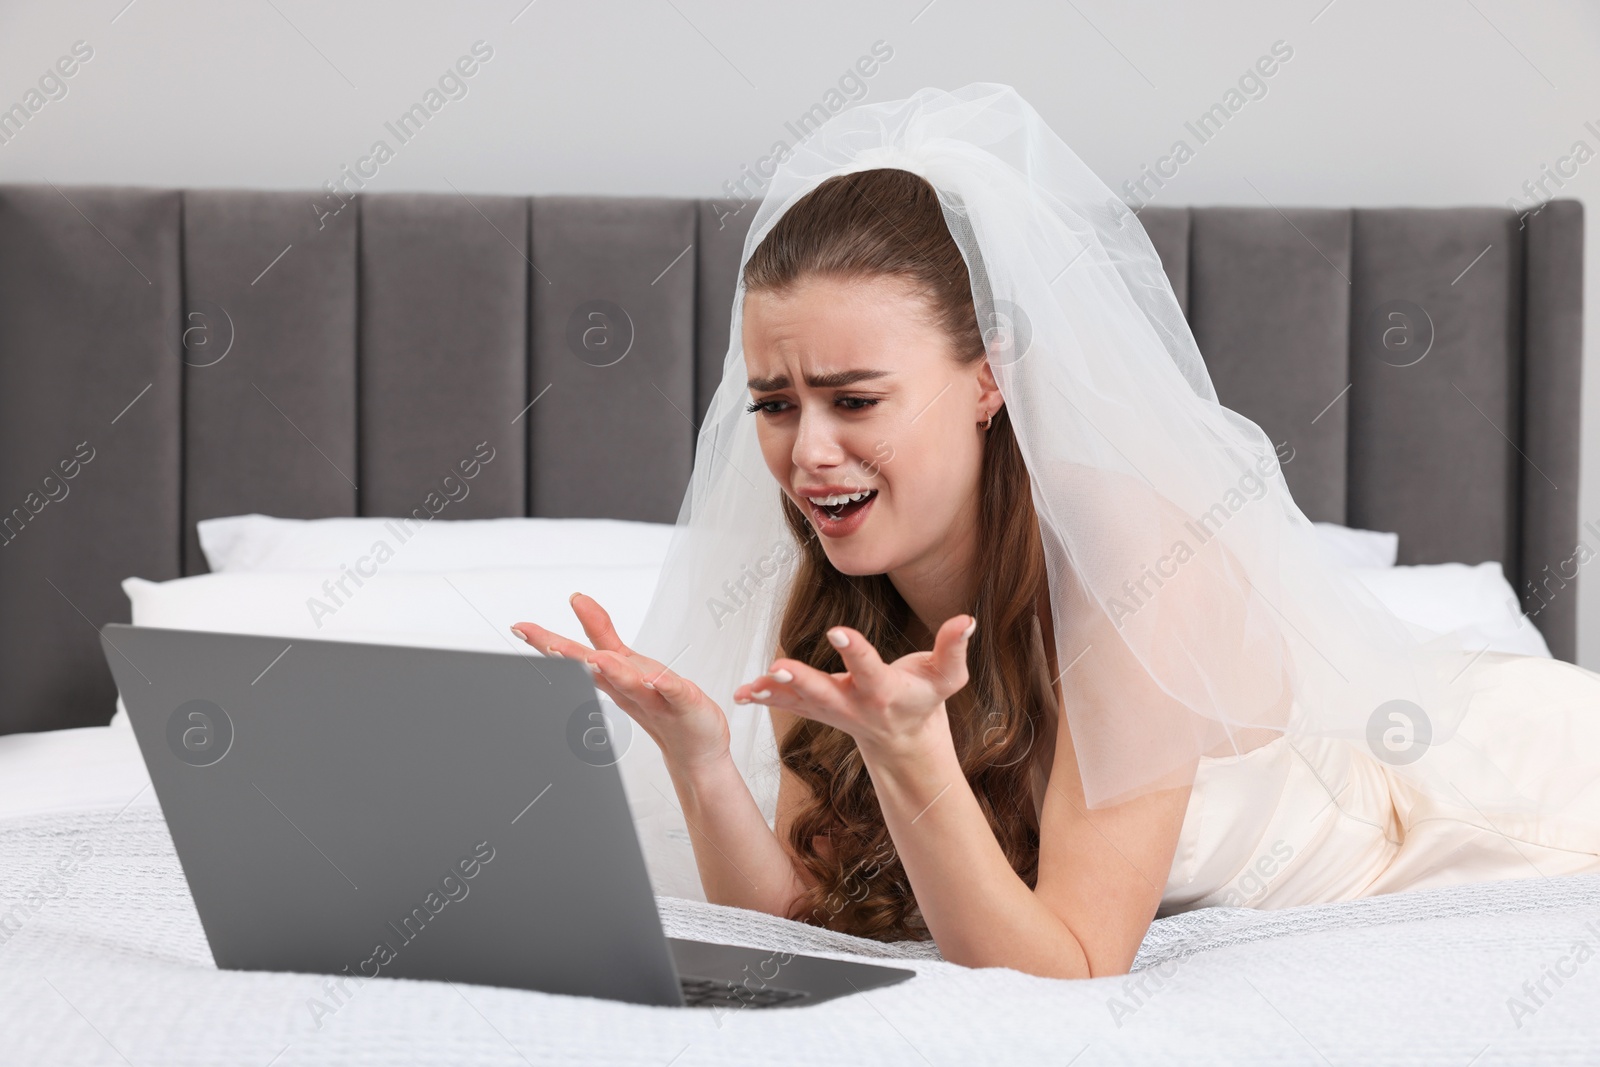 Photo of Emotional bride with laptop on bed in bedroom